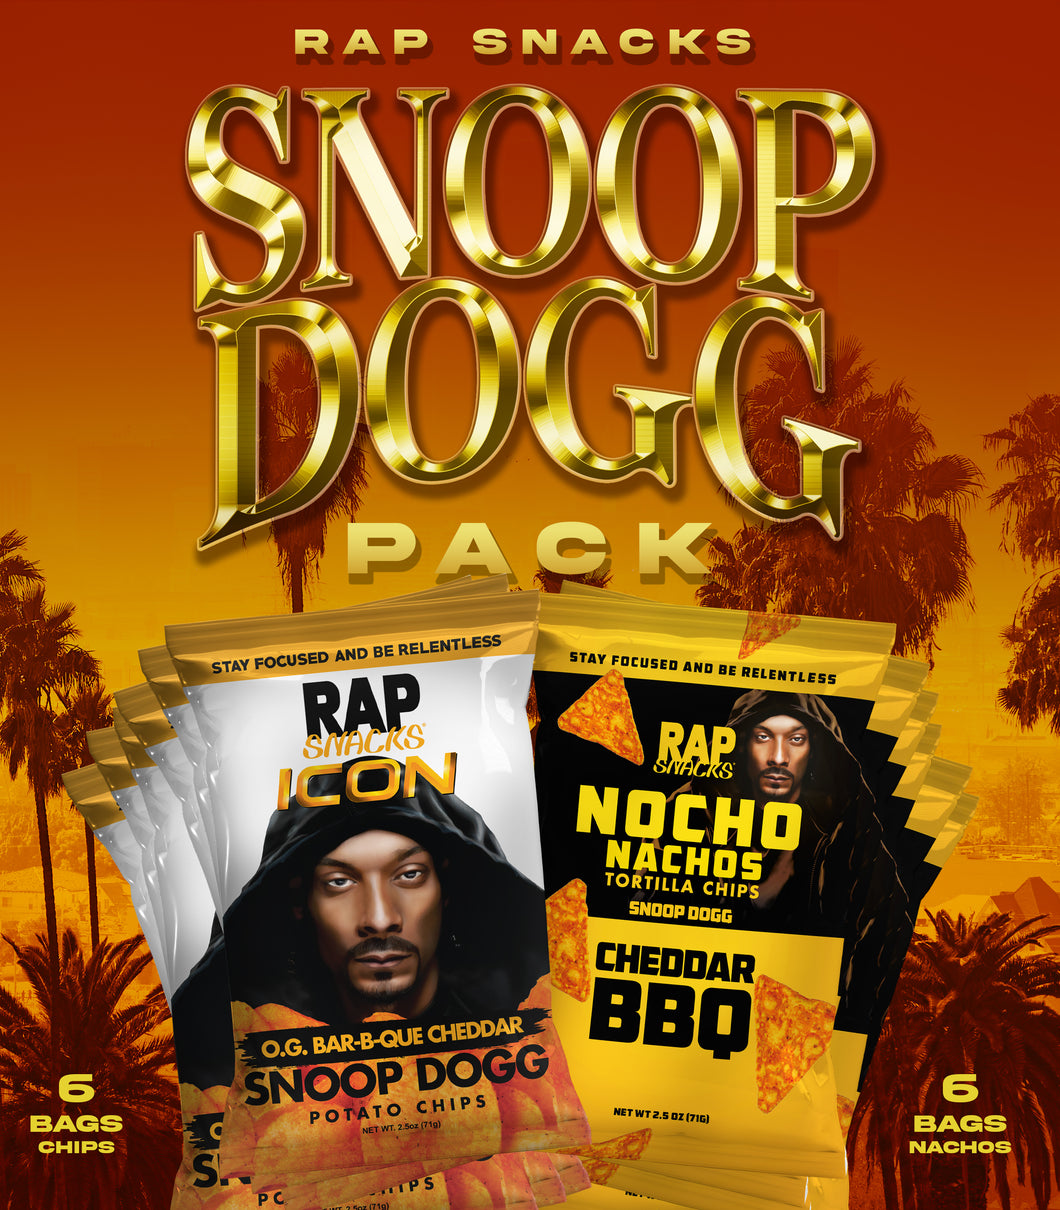 Snoop Dogg Music Pack | 12 Bags